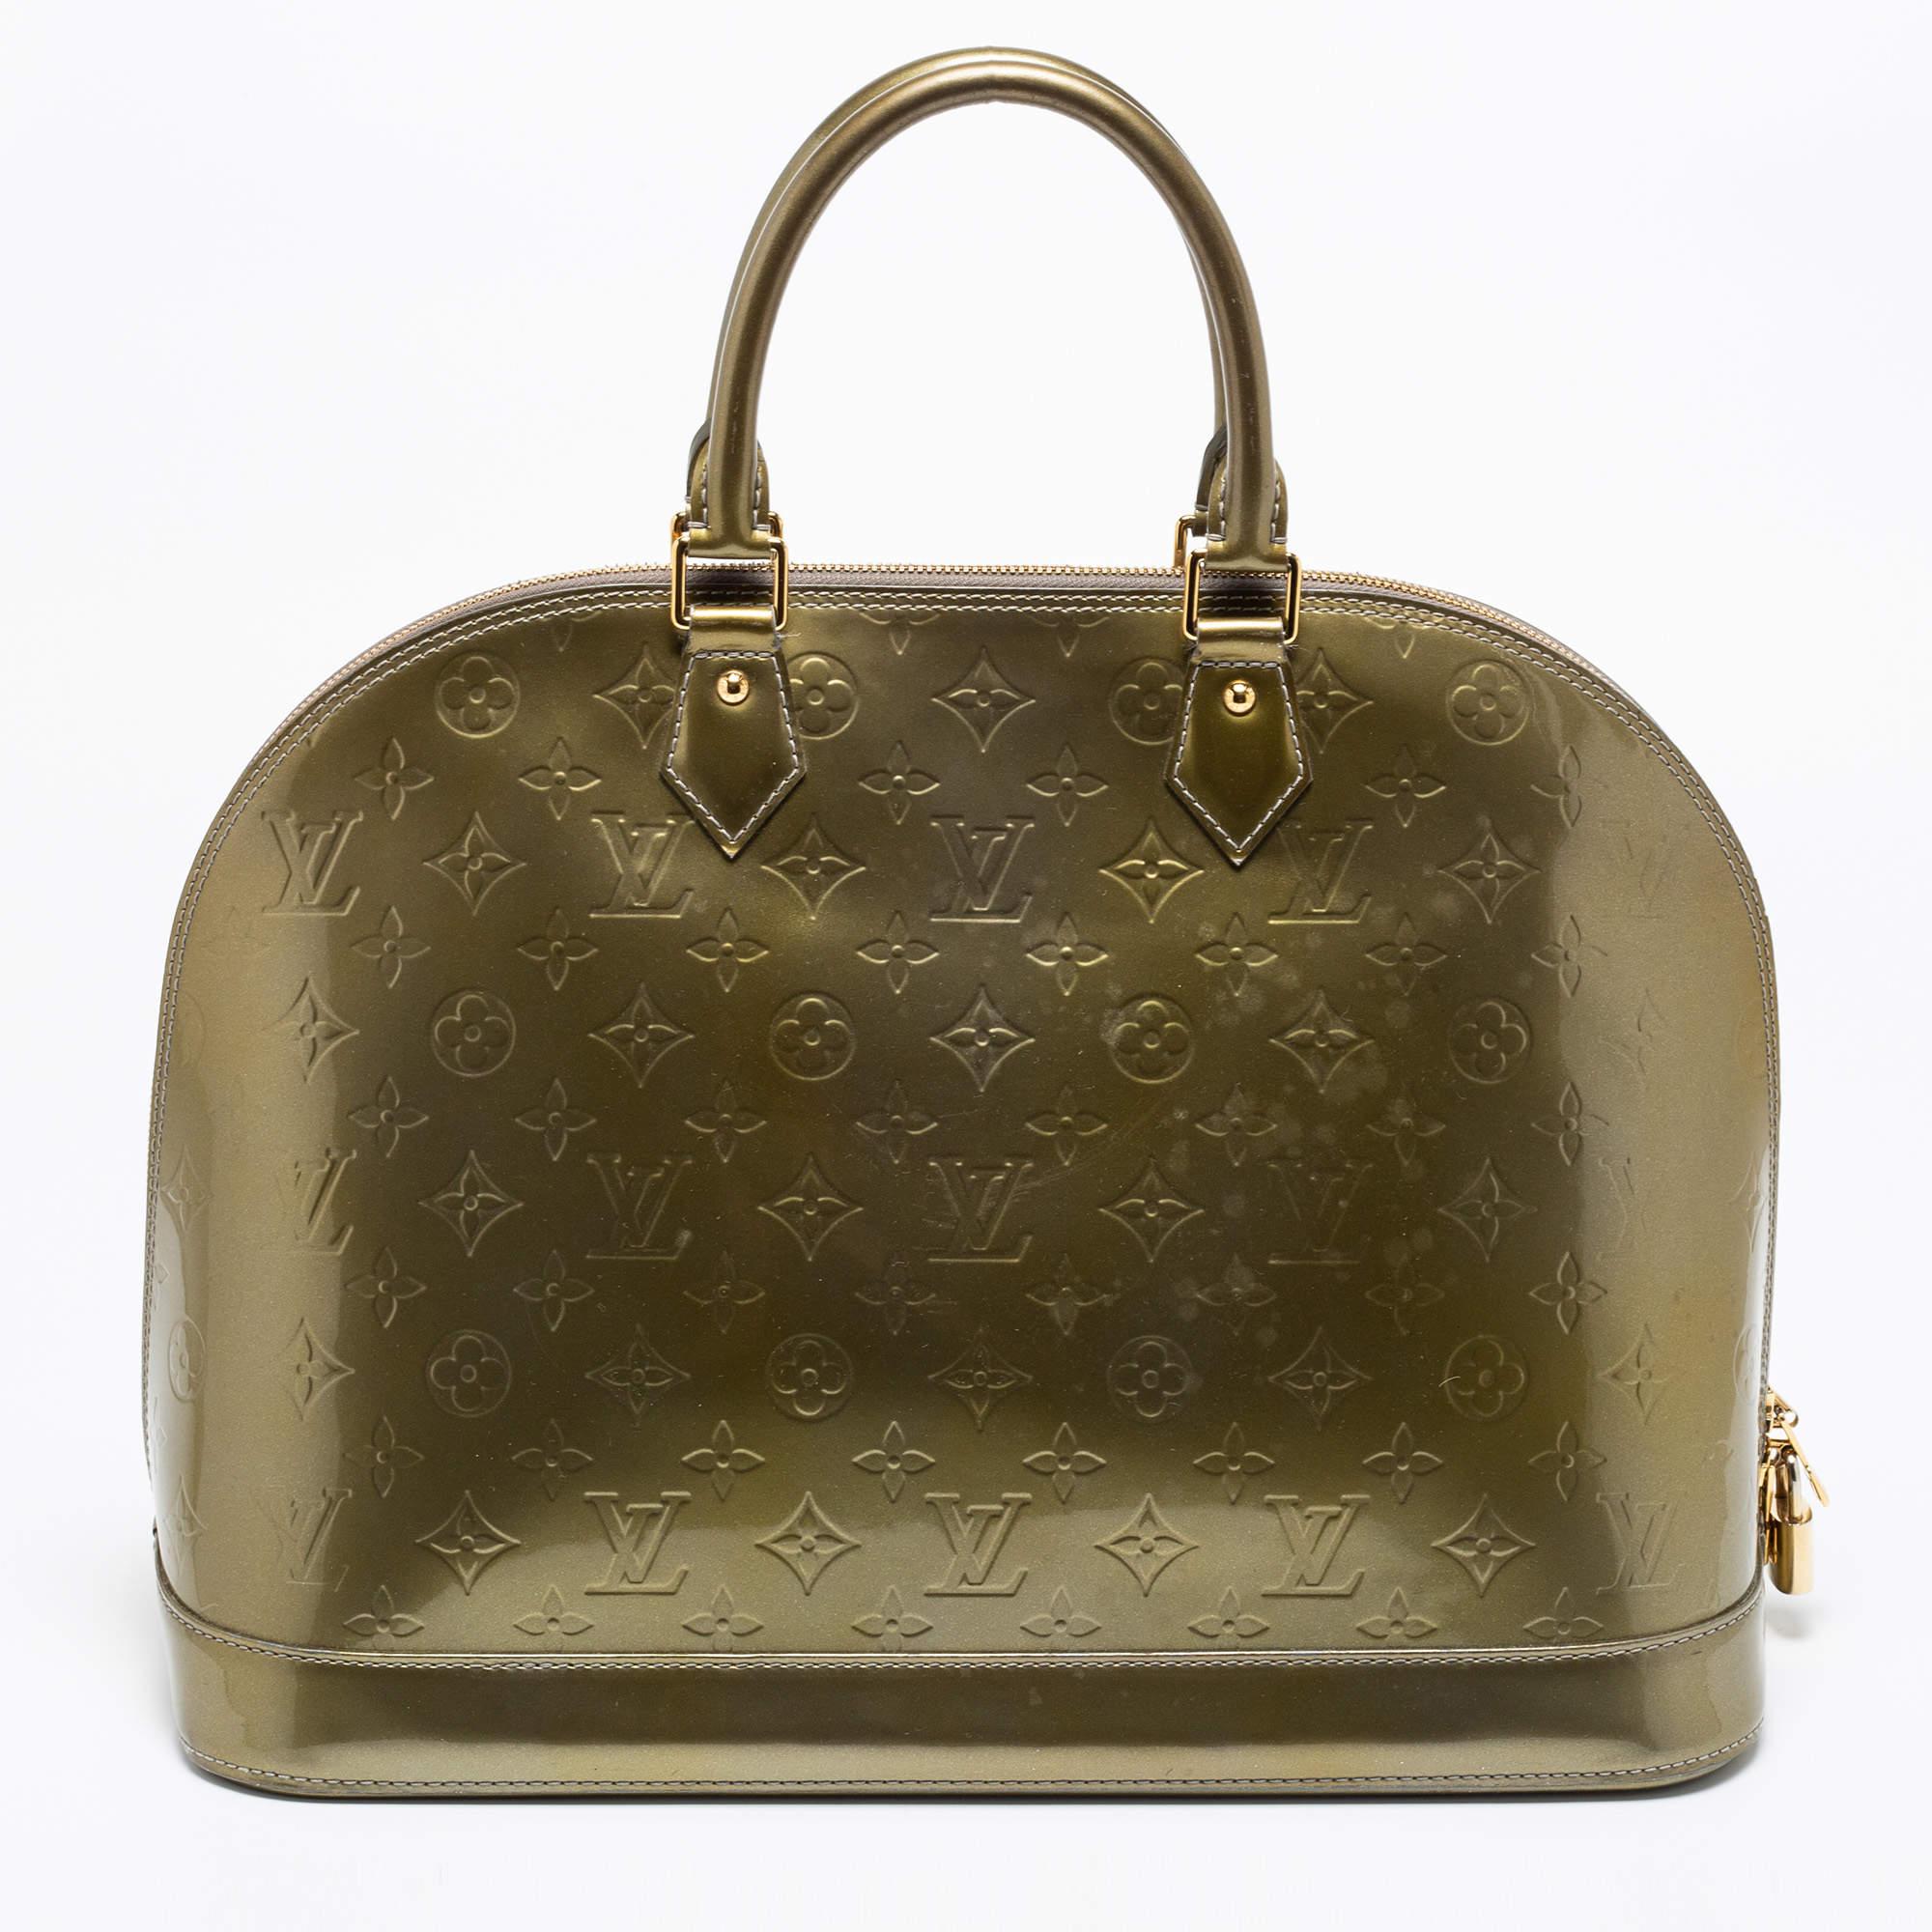 From one of the most iconic collections of Louis Vuitton, this Alma bag is imbued with exquisite craftsmanship and historic details. Constructed from Vert Olive Monogram Vernis leather, it displays dual handles at the top, gold-tone hardware, and a